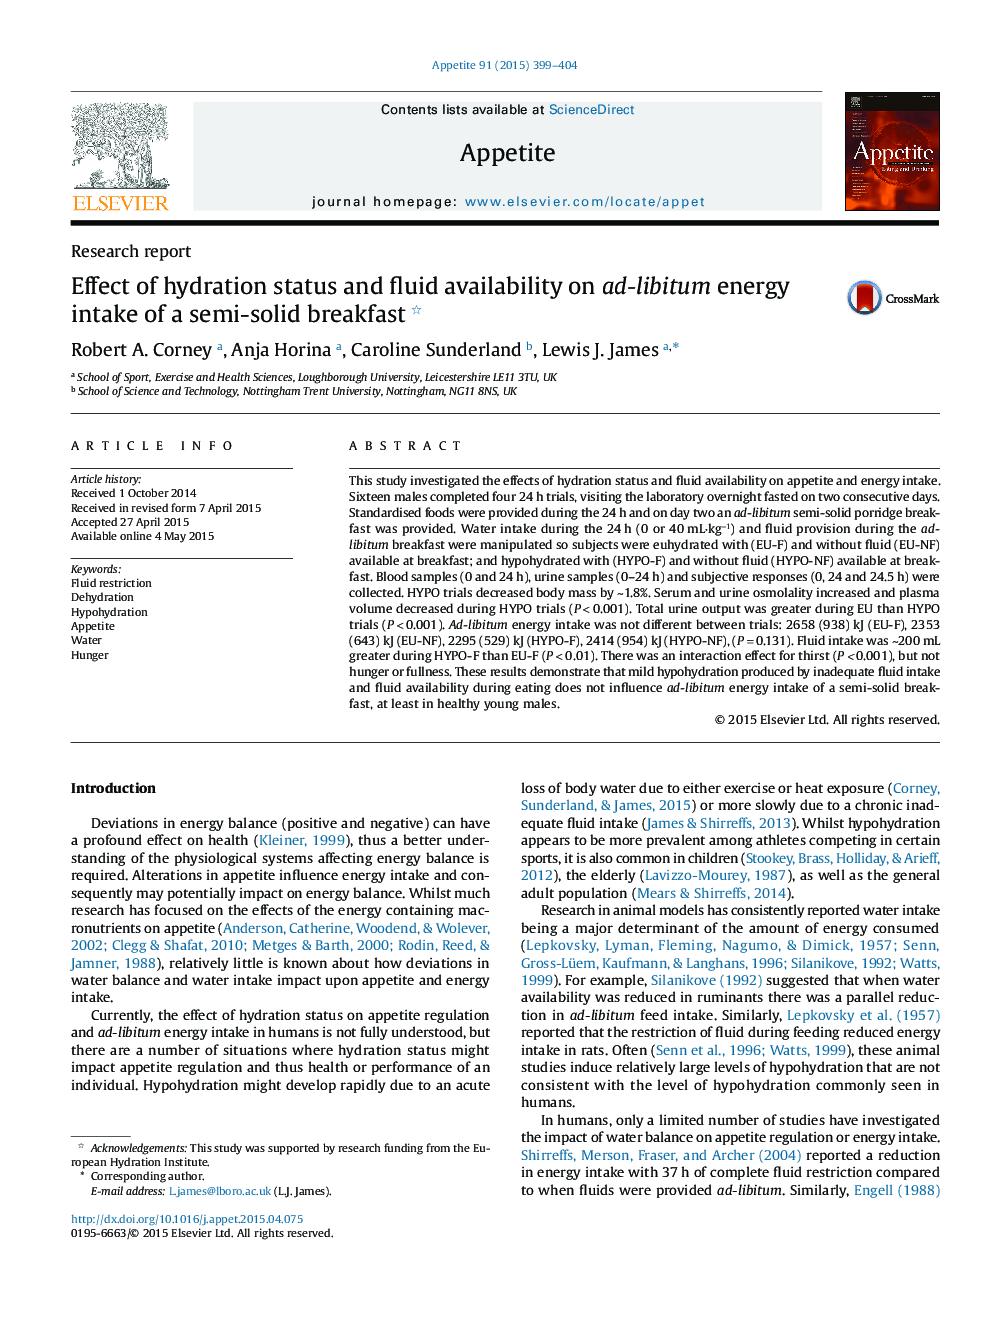 Effect of hydration status and fluid availability on ad-libitum energy intake of a semi-solid breakfast